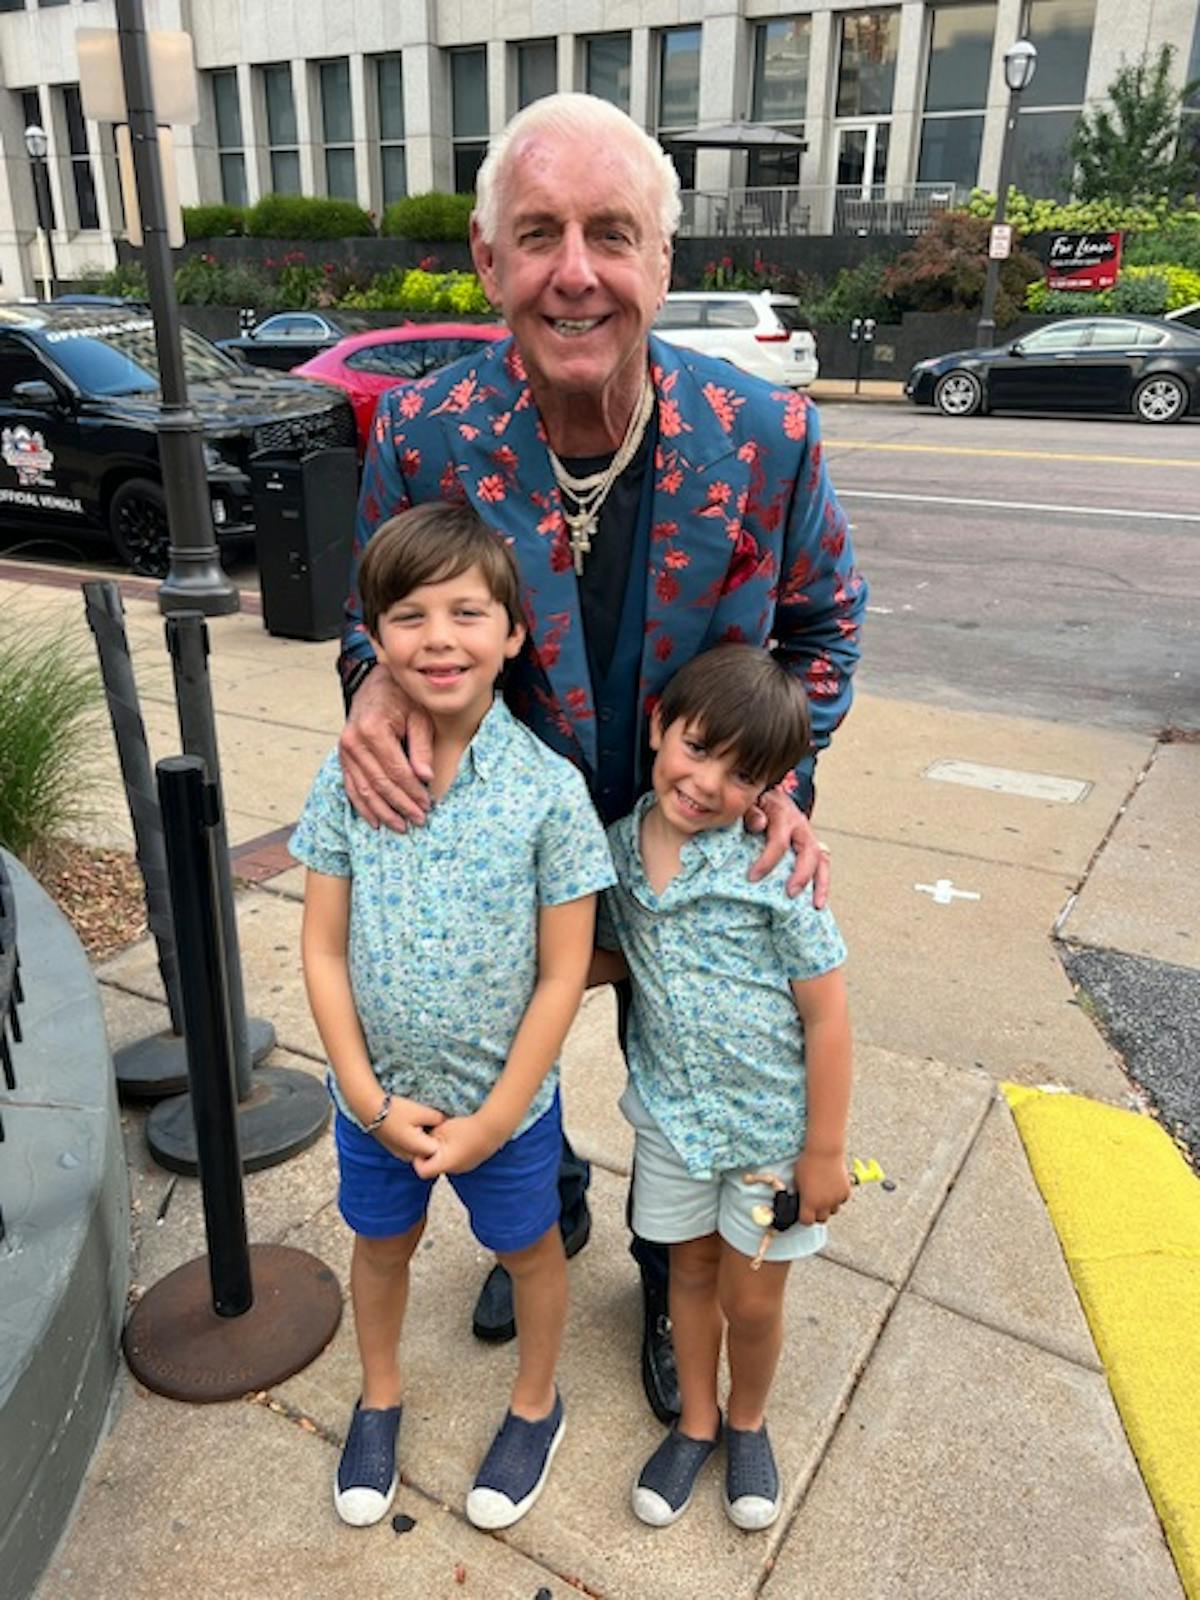 Ric Flair and a little boy standing on a sidewalk